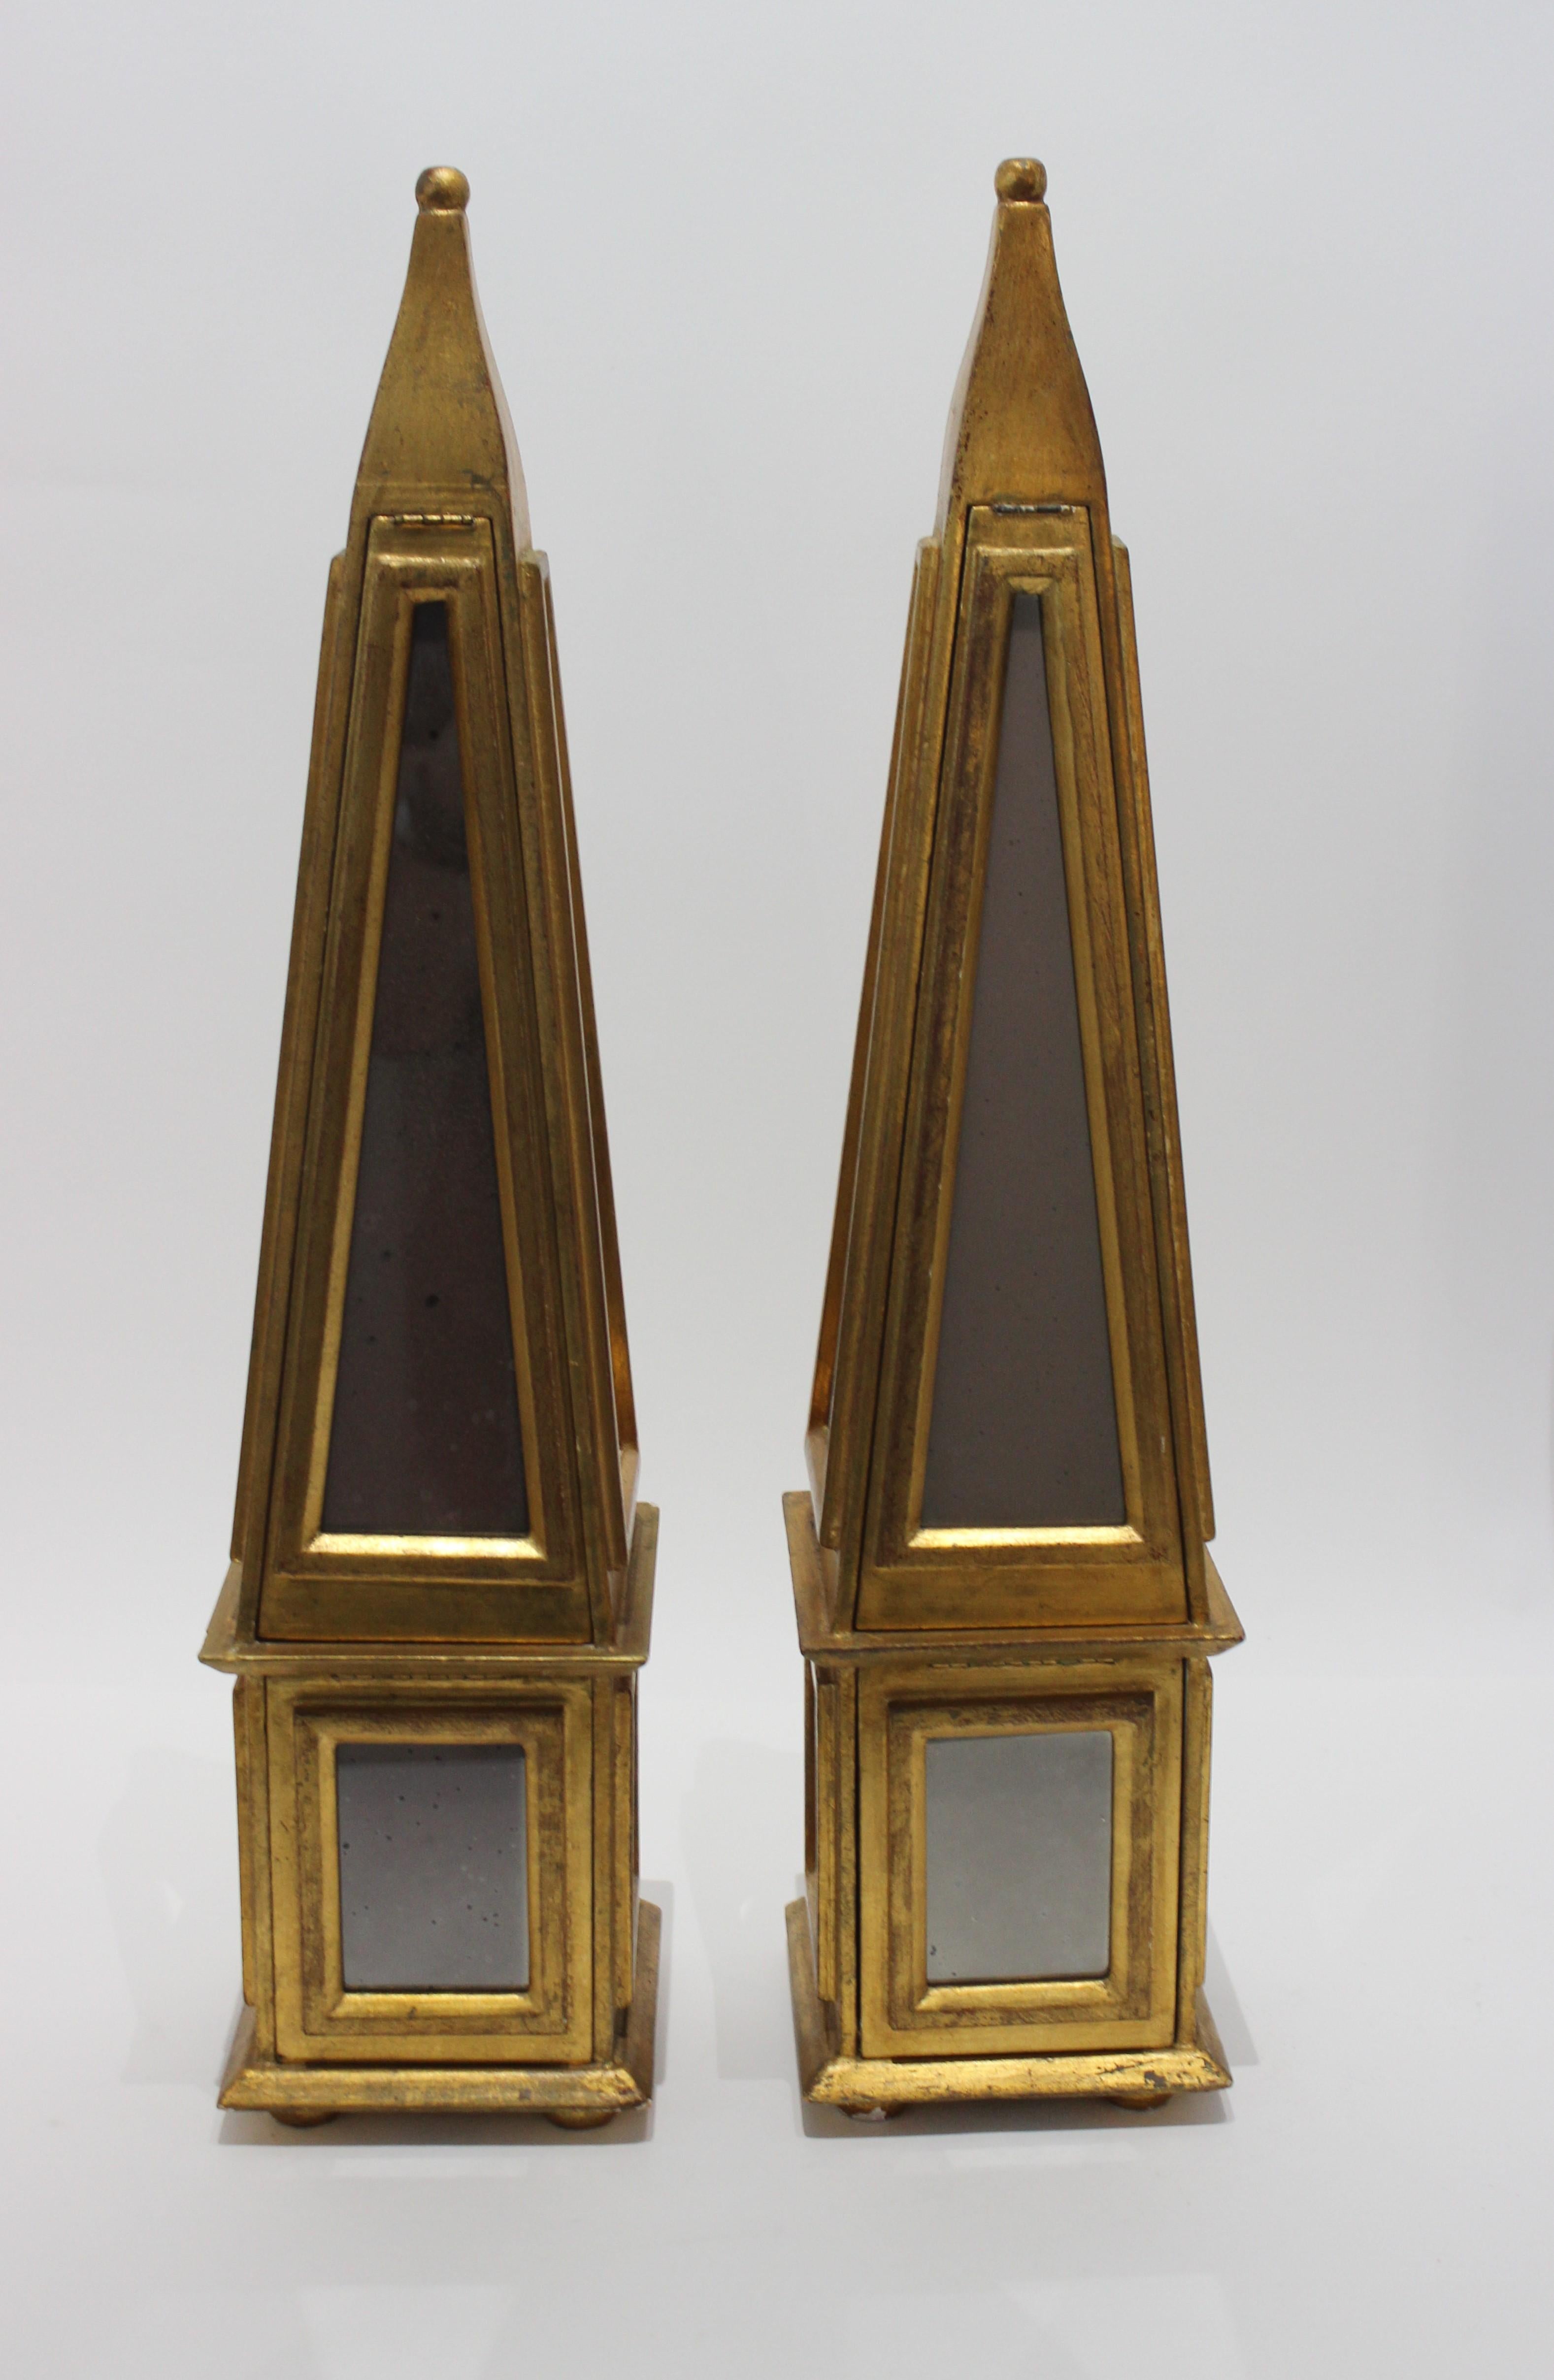 A fabulous pair of 1960s Italian Florentine obelisks, mirror and giltwood.
We discovered each one as a secret compartment -- see pictures. A secret nook in each for hiding things.